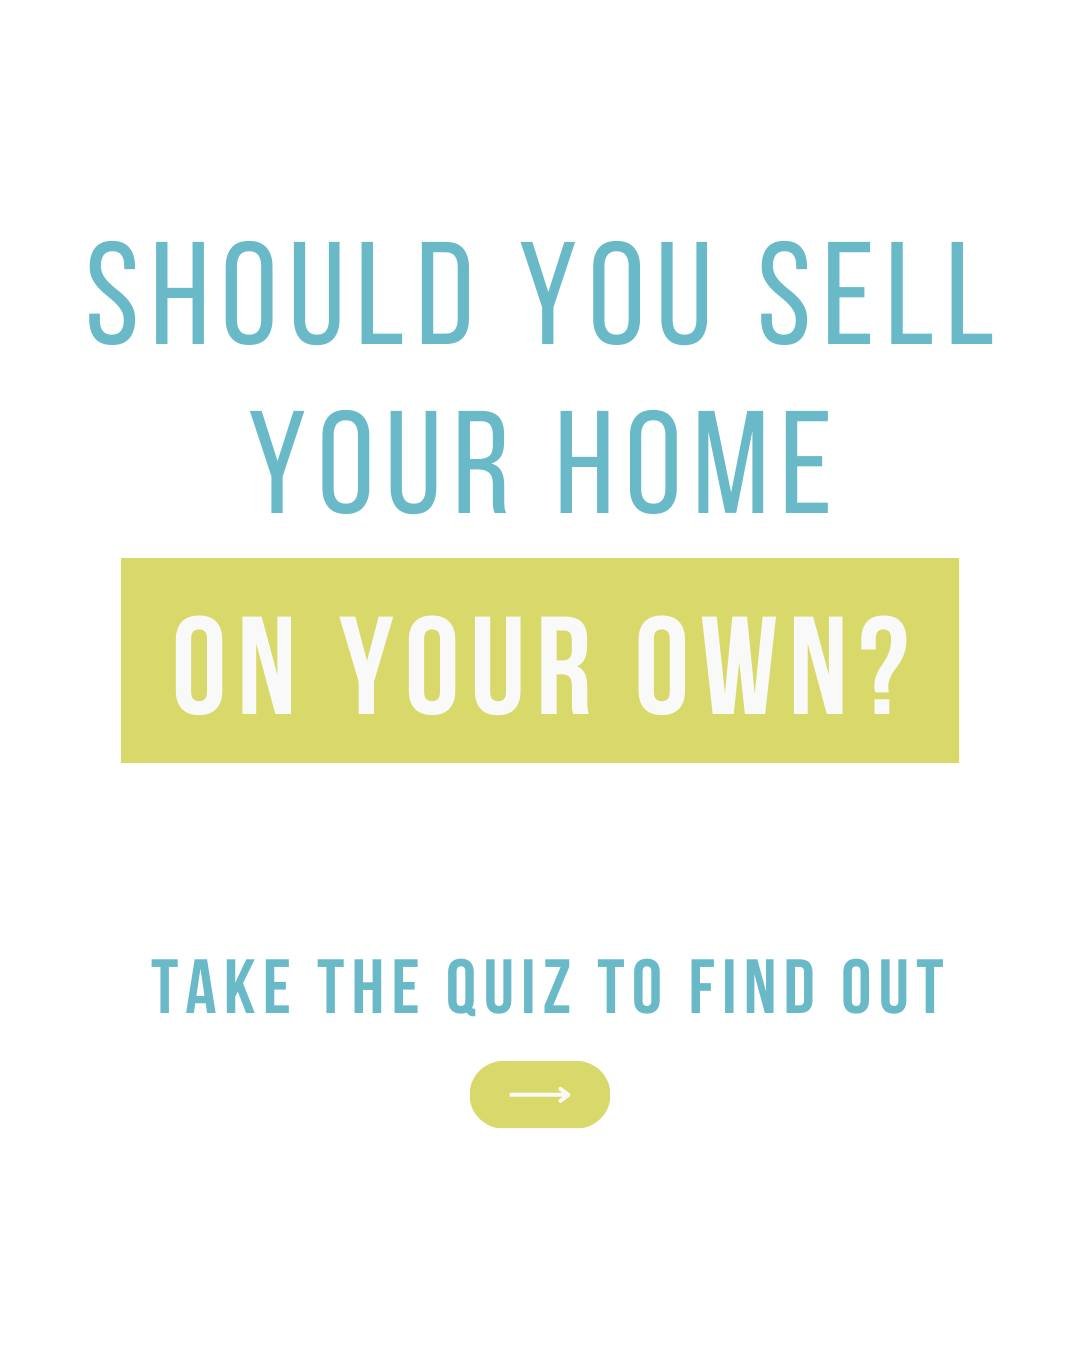 This post is for all the people out there who are considering to sell their home on their own #forsalebyowners

➡️ Swipe to take the quiz first.

Ready to see what your results are? 

If you answered&hellip;
- Mostly A's: You might have the skills an